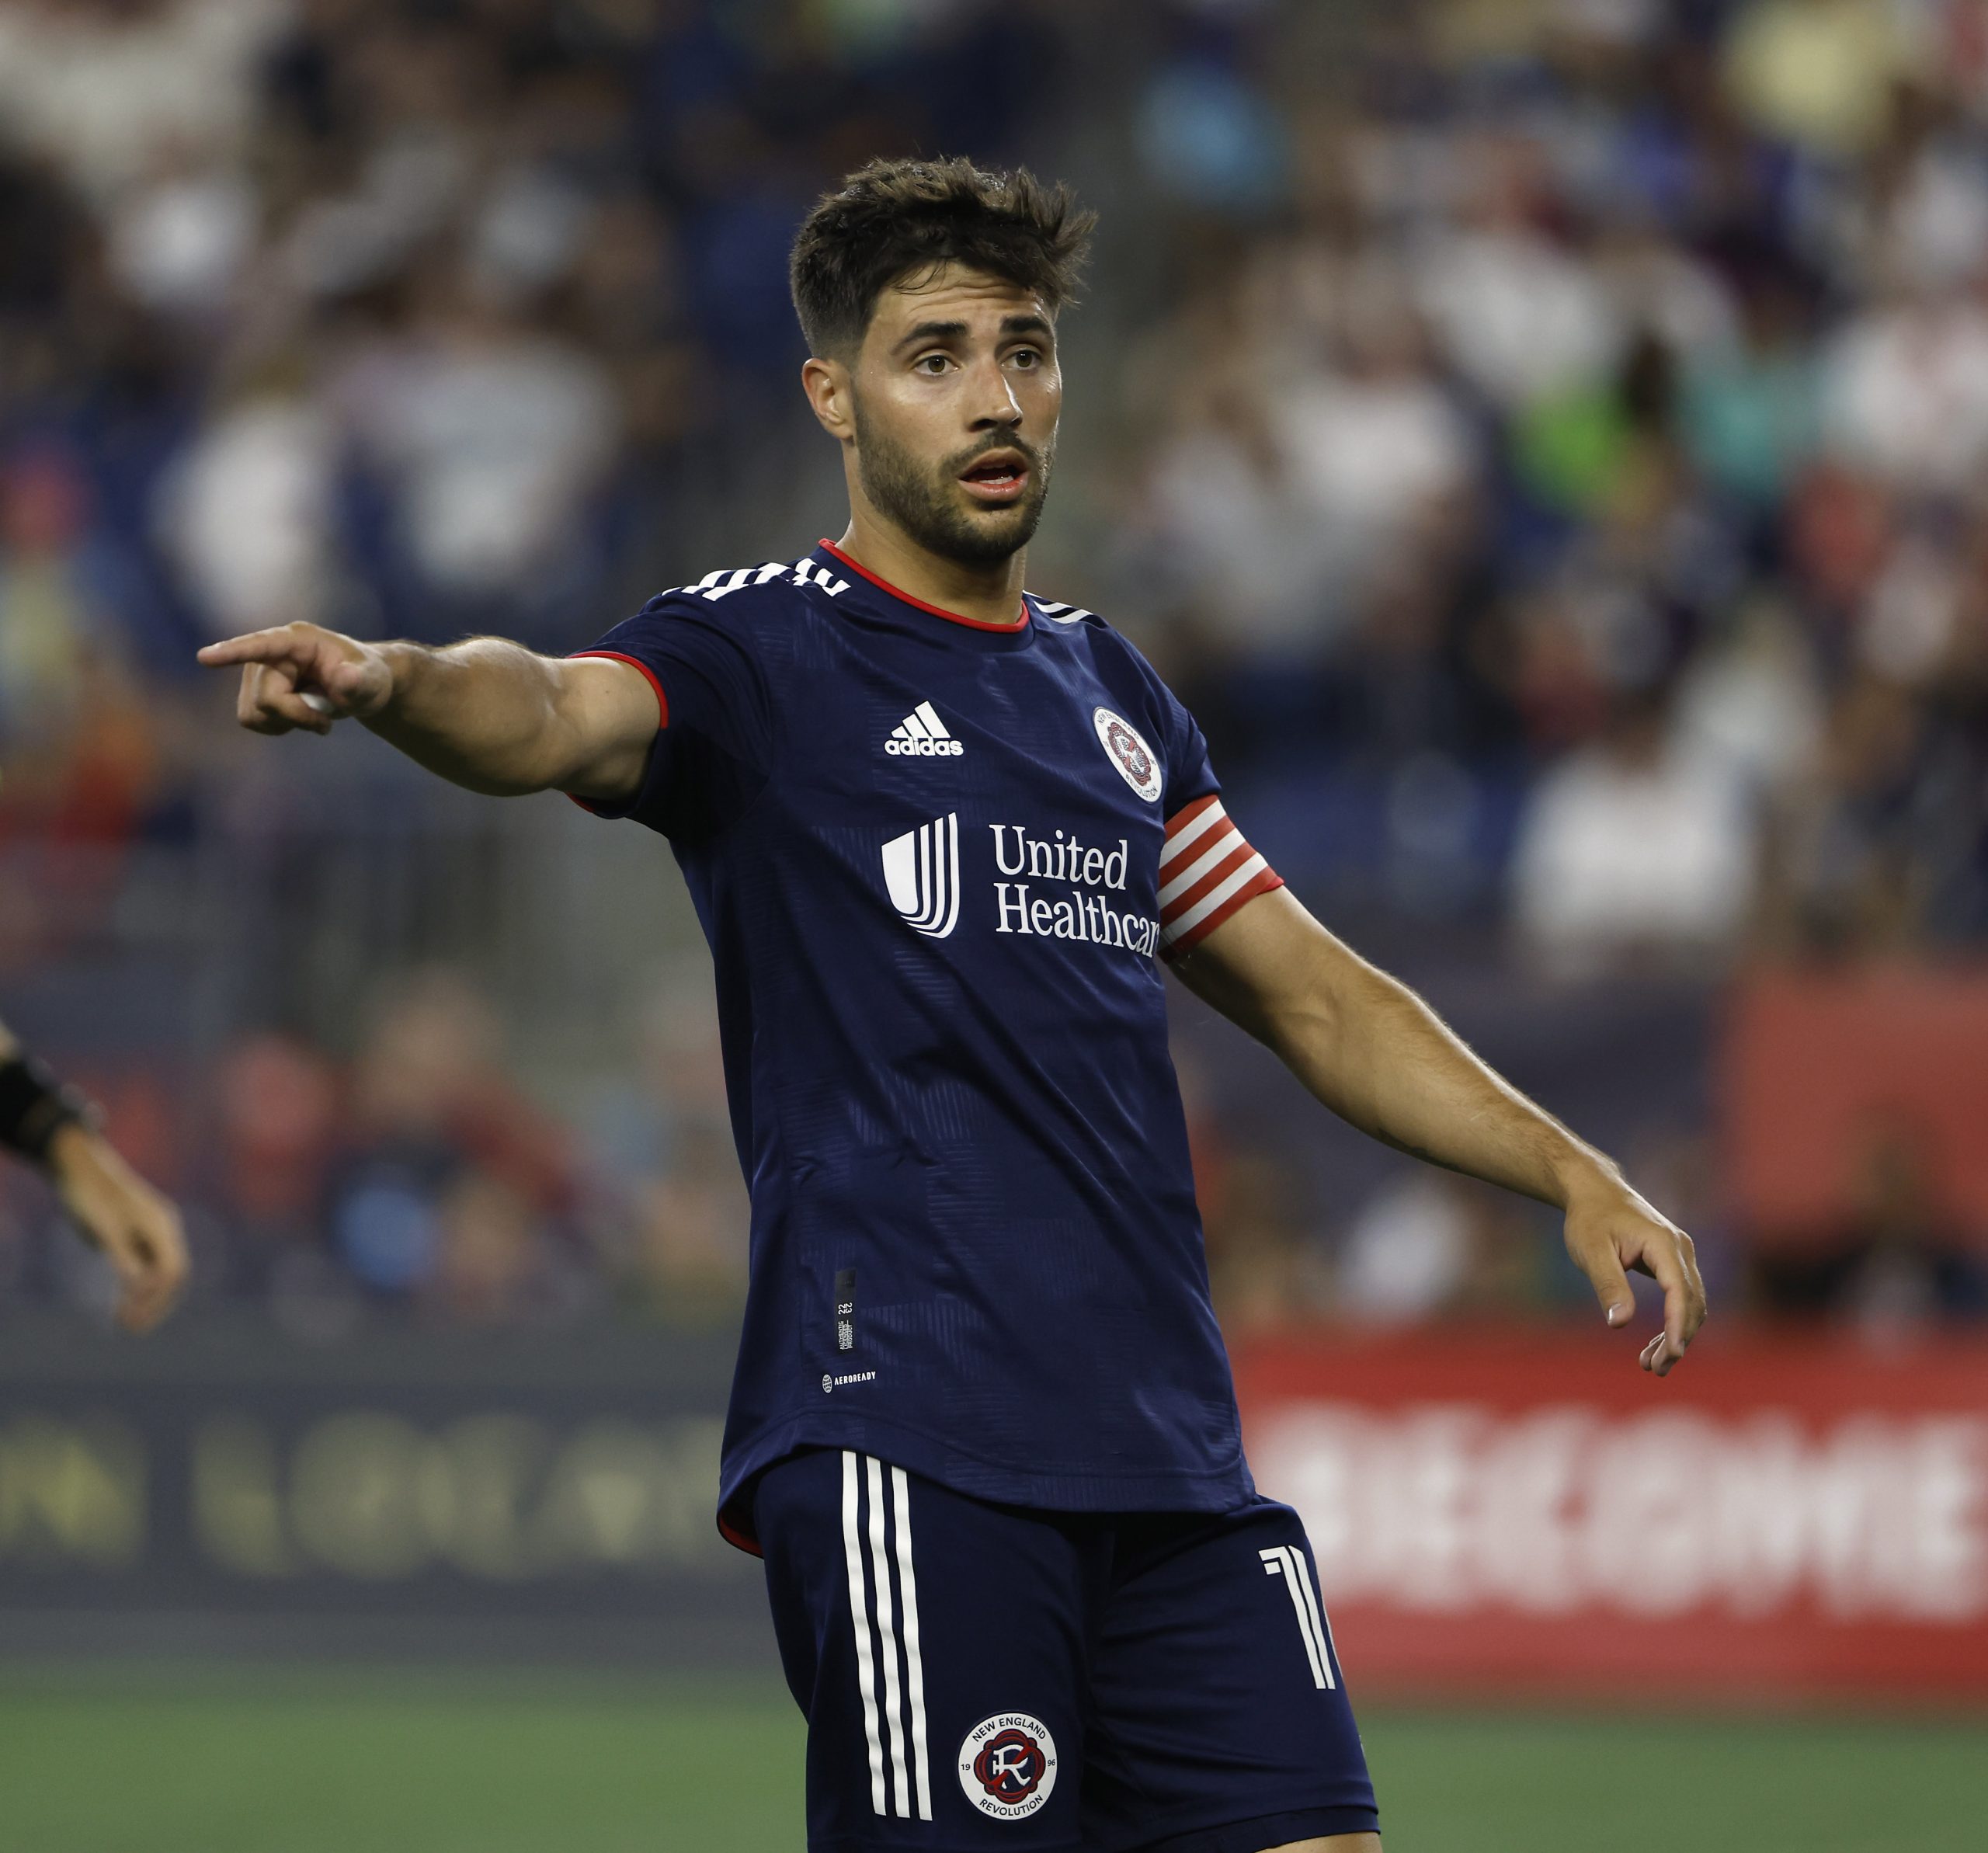 Ian Harkes scores first goals in a Revolution jersey against his